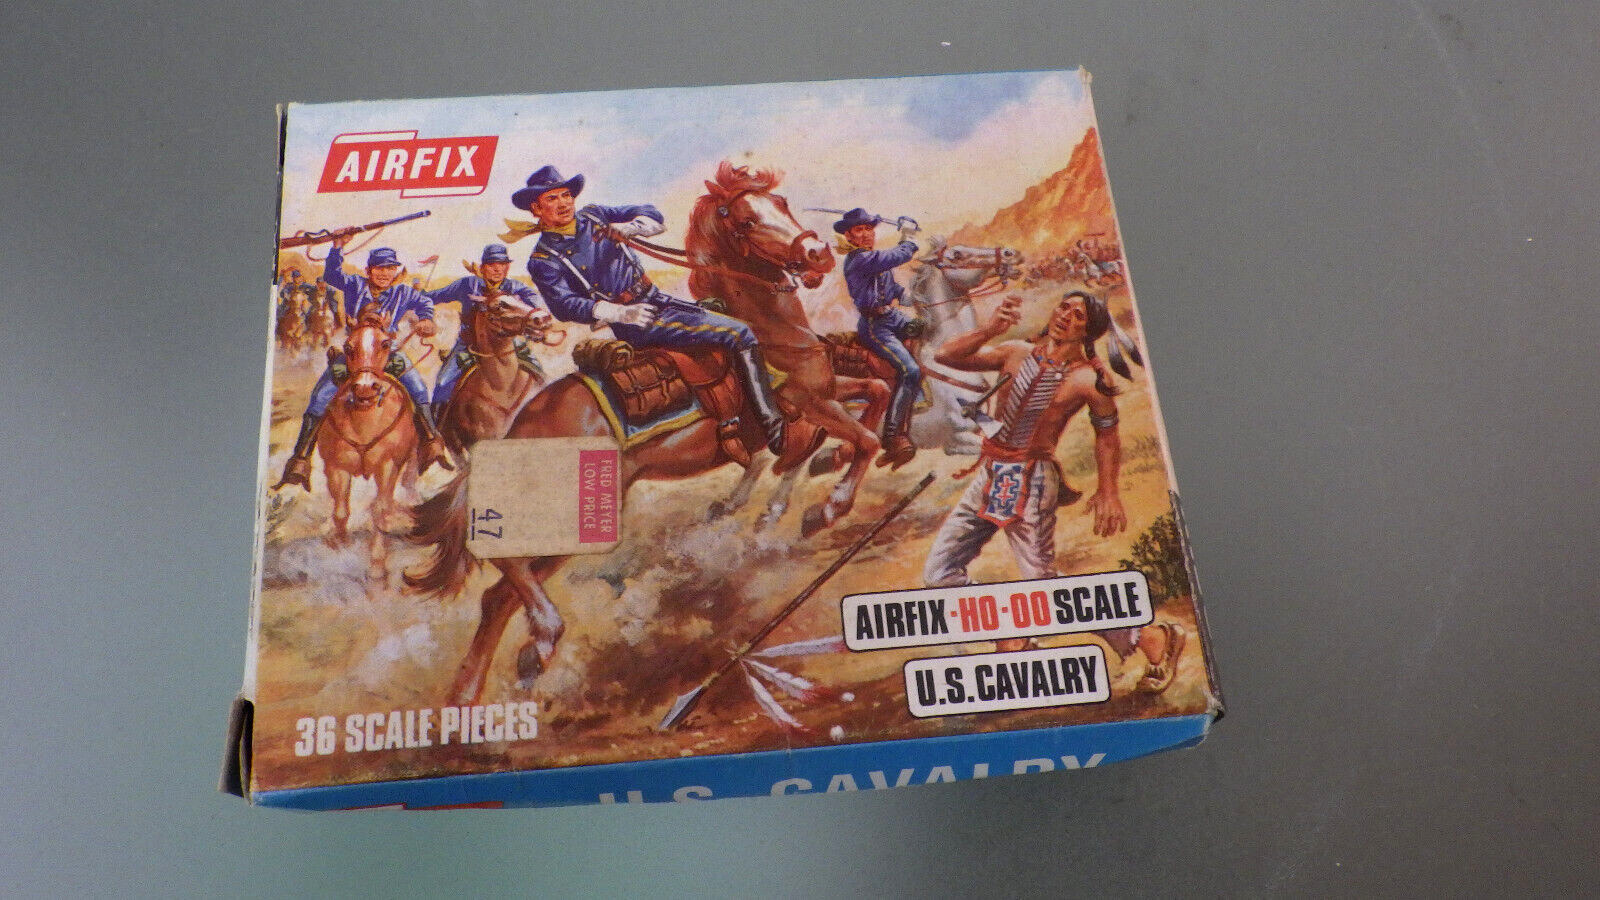 Vtg 1960s AIRFIX HO-OO 1/72 Scale Playset Figures US Cavalry w/ BOX 98% Complete